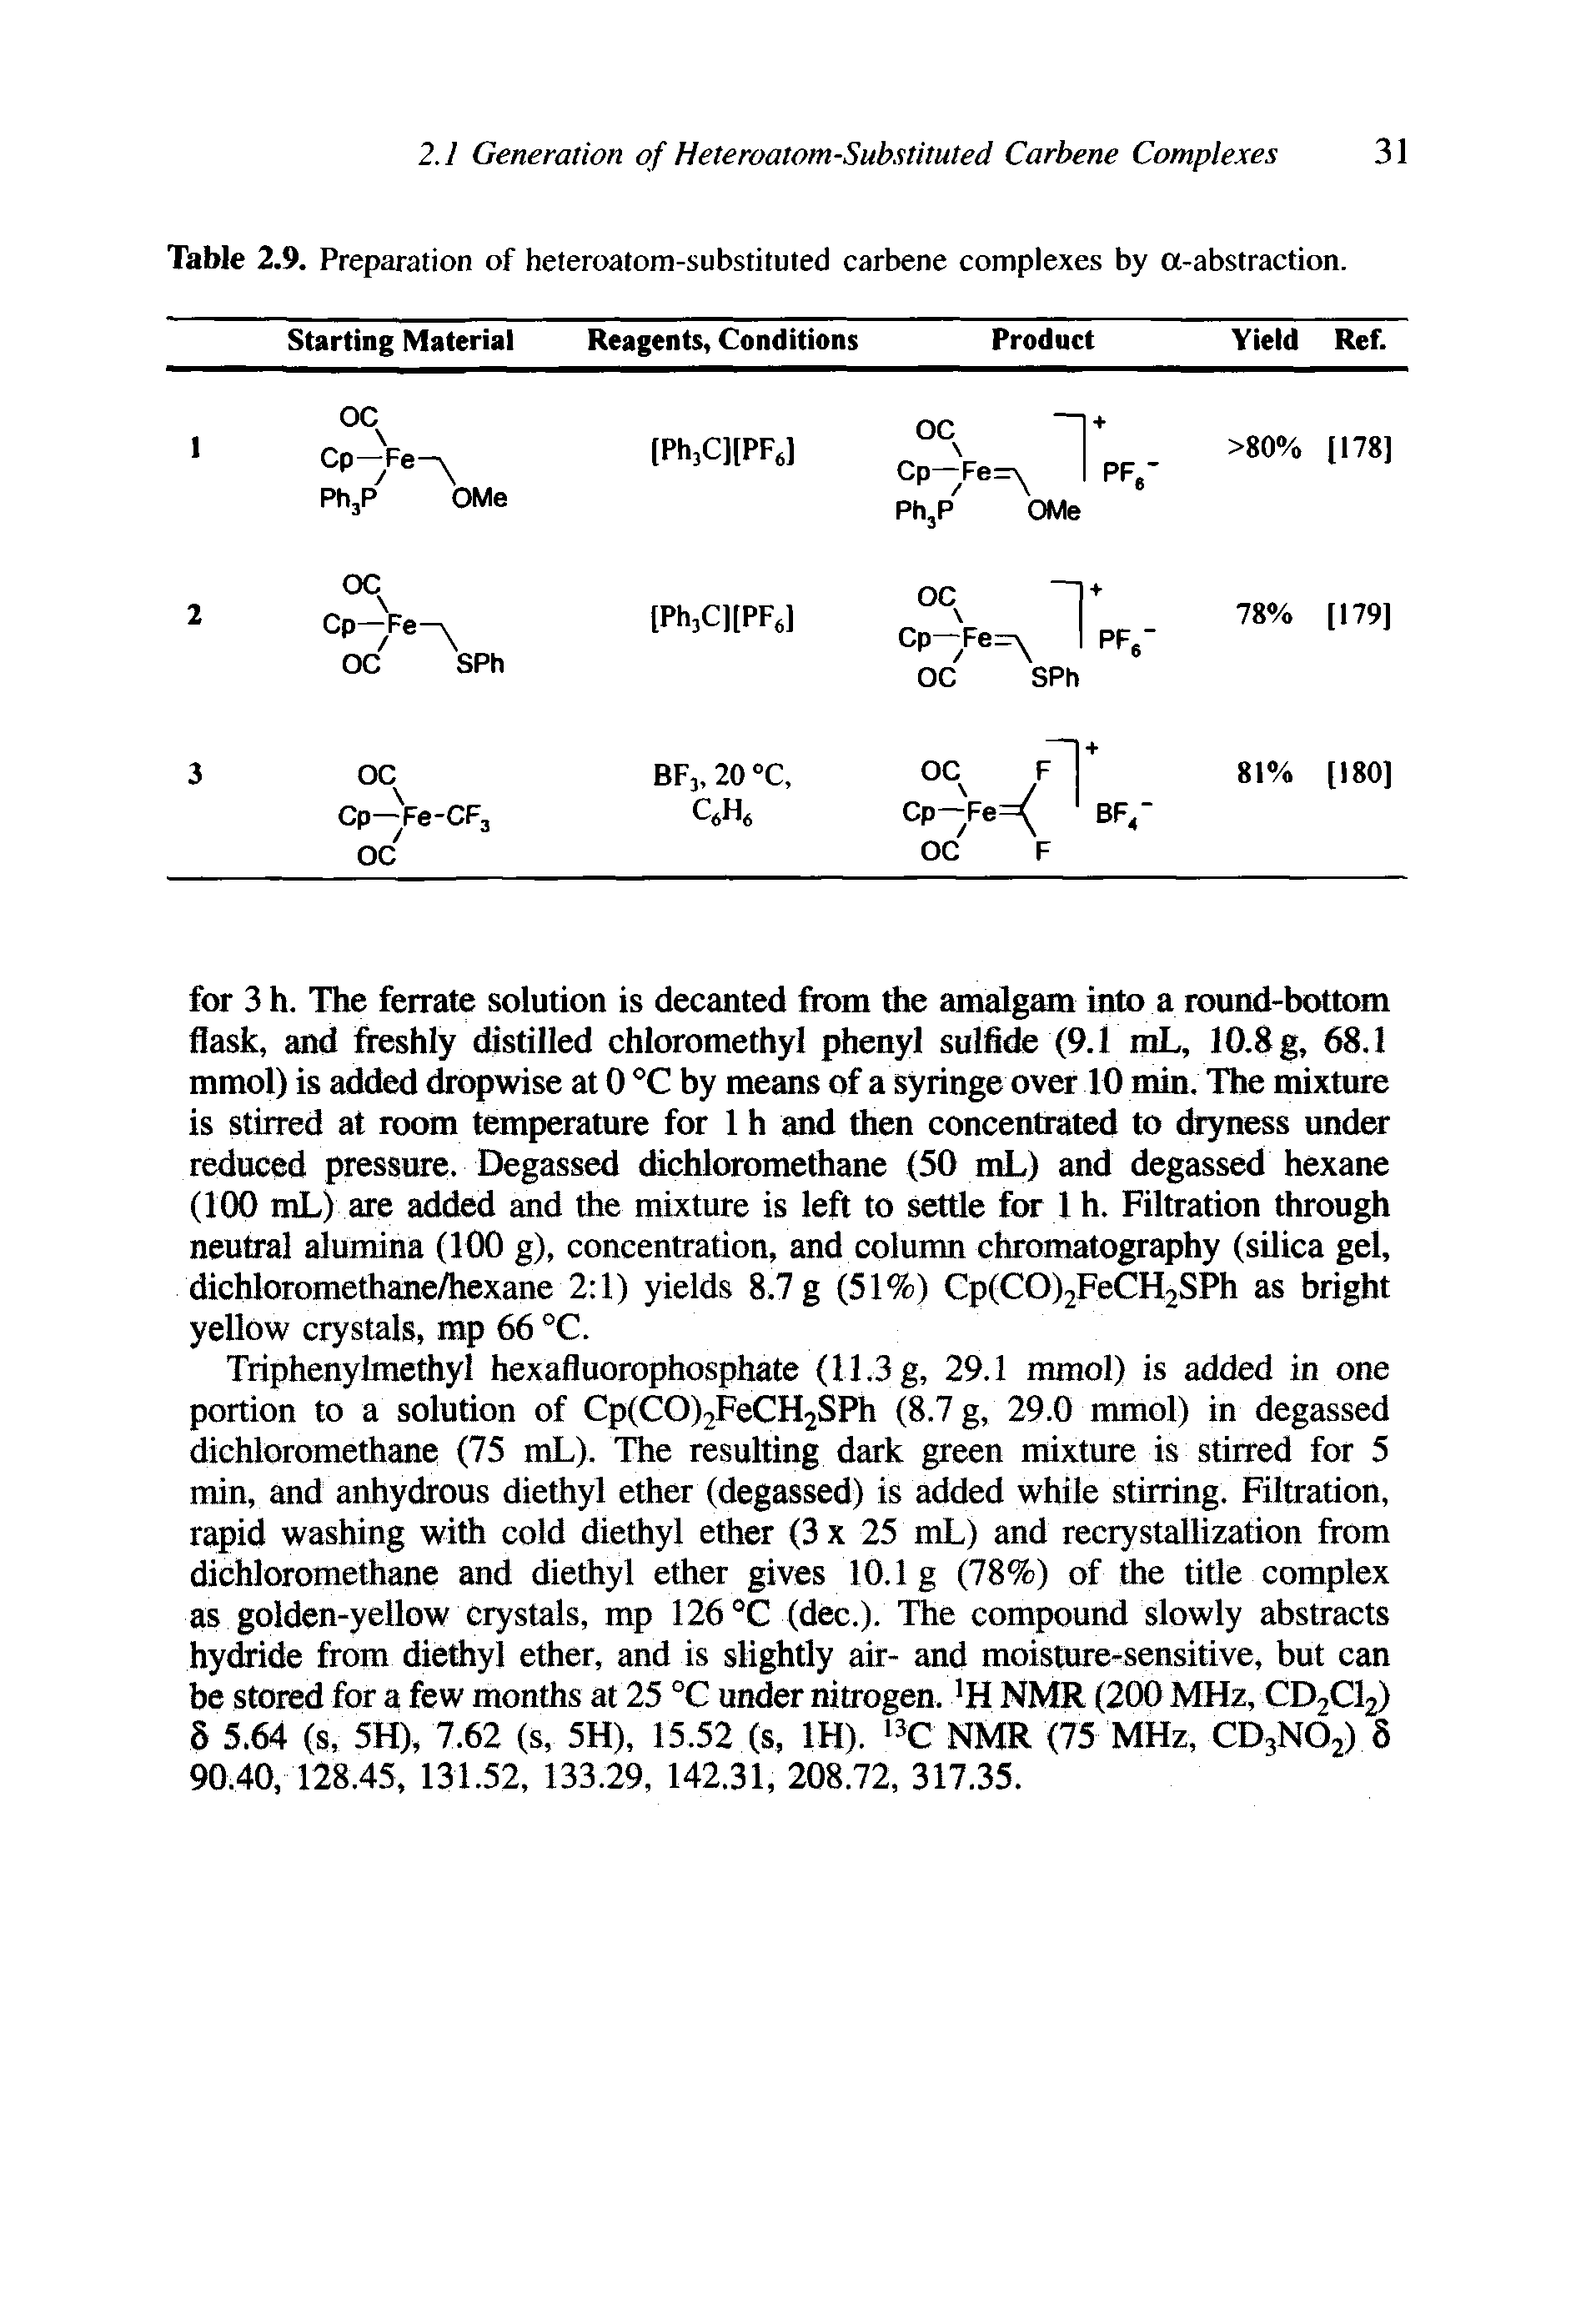 Table 2.9. Preparation of heteroatom-substituted carbene complexes by a-abstraction.